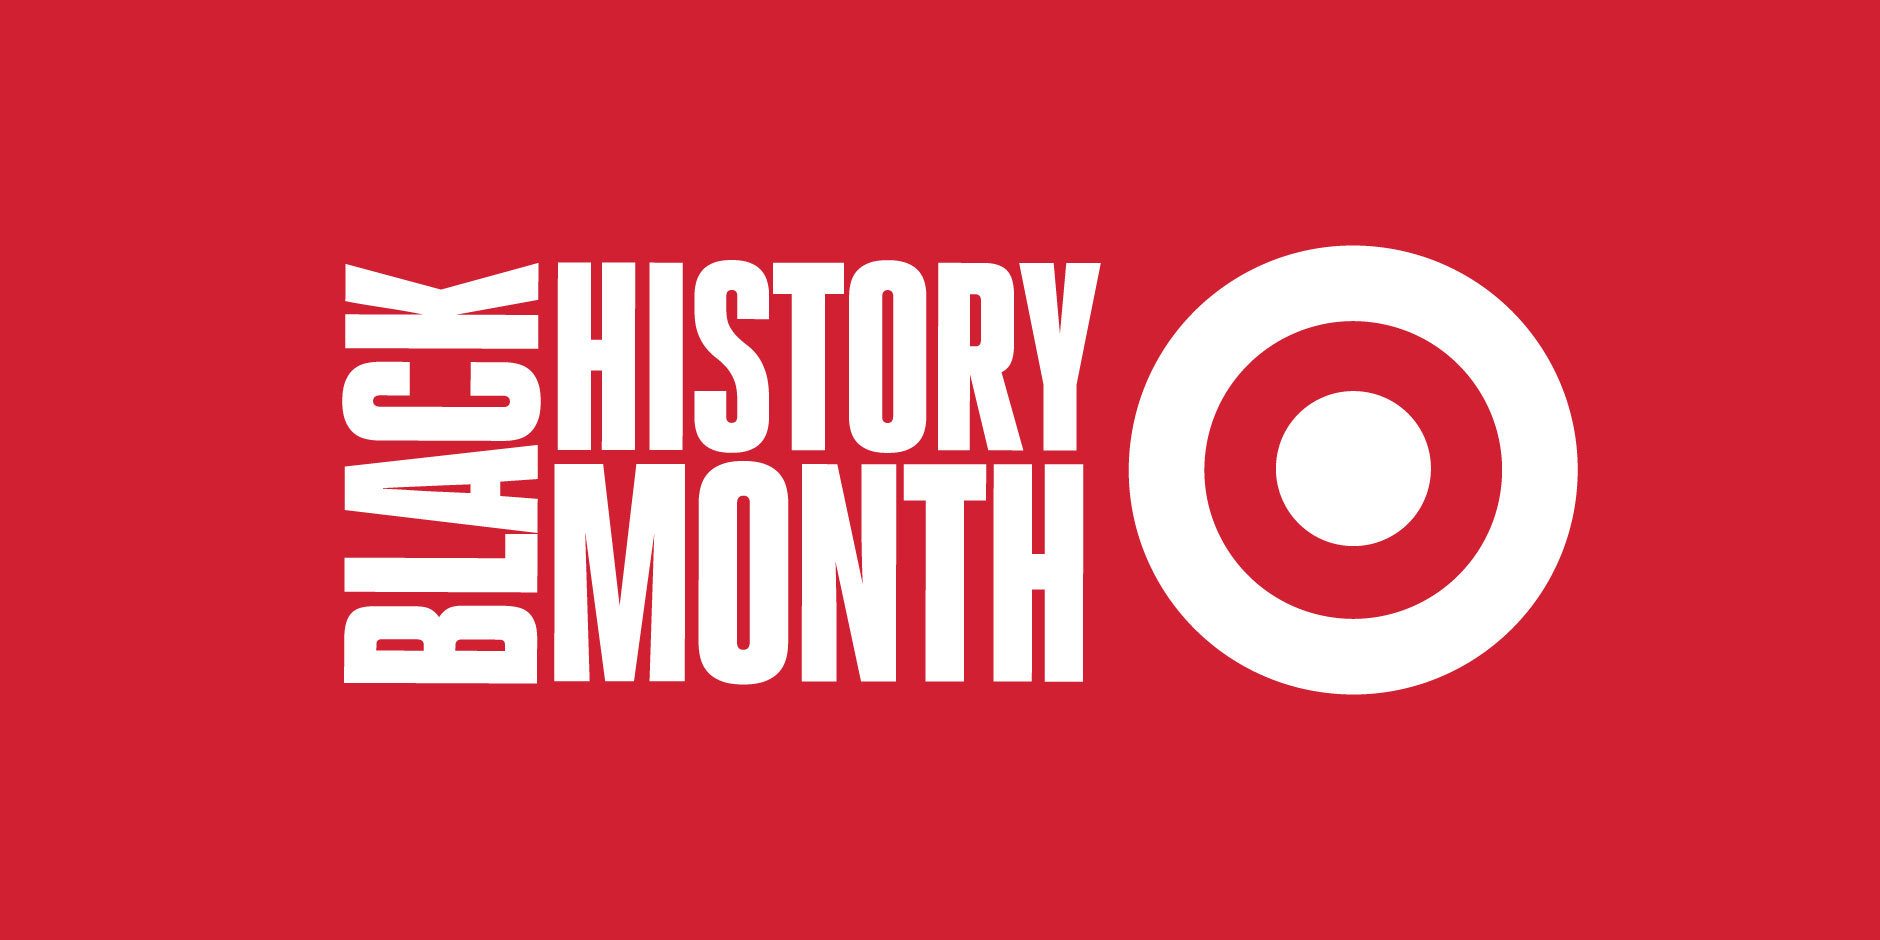 A graphic that reads "Black History Month" next to the Target logo.